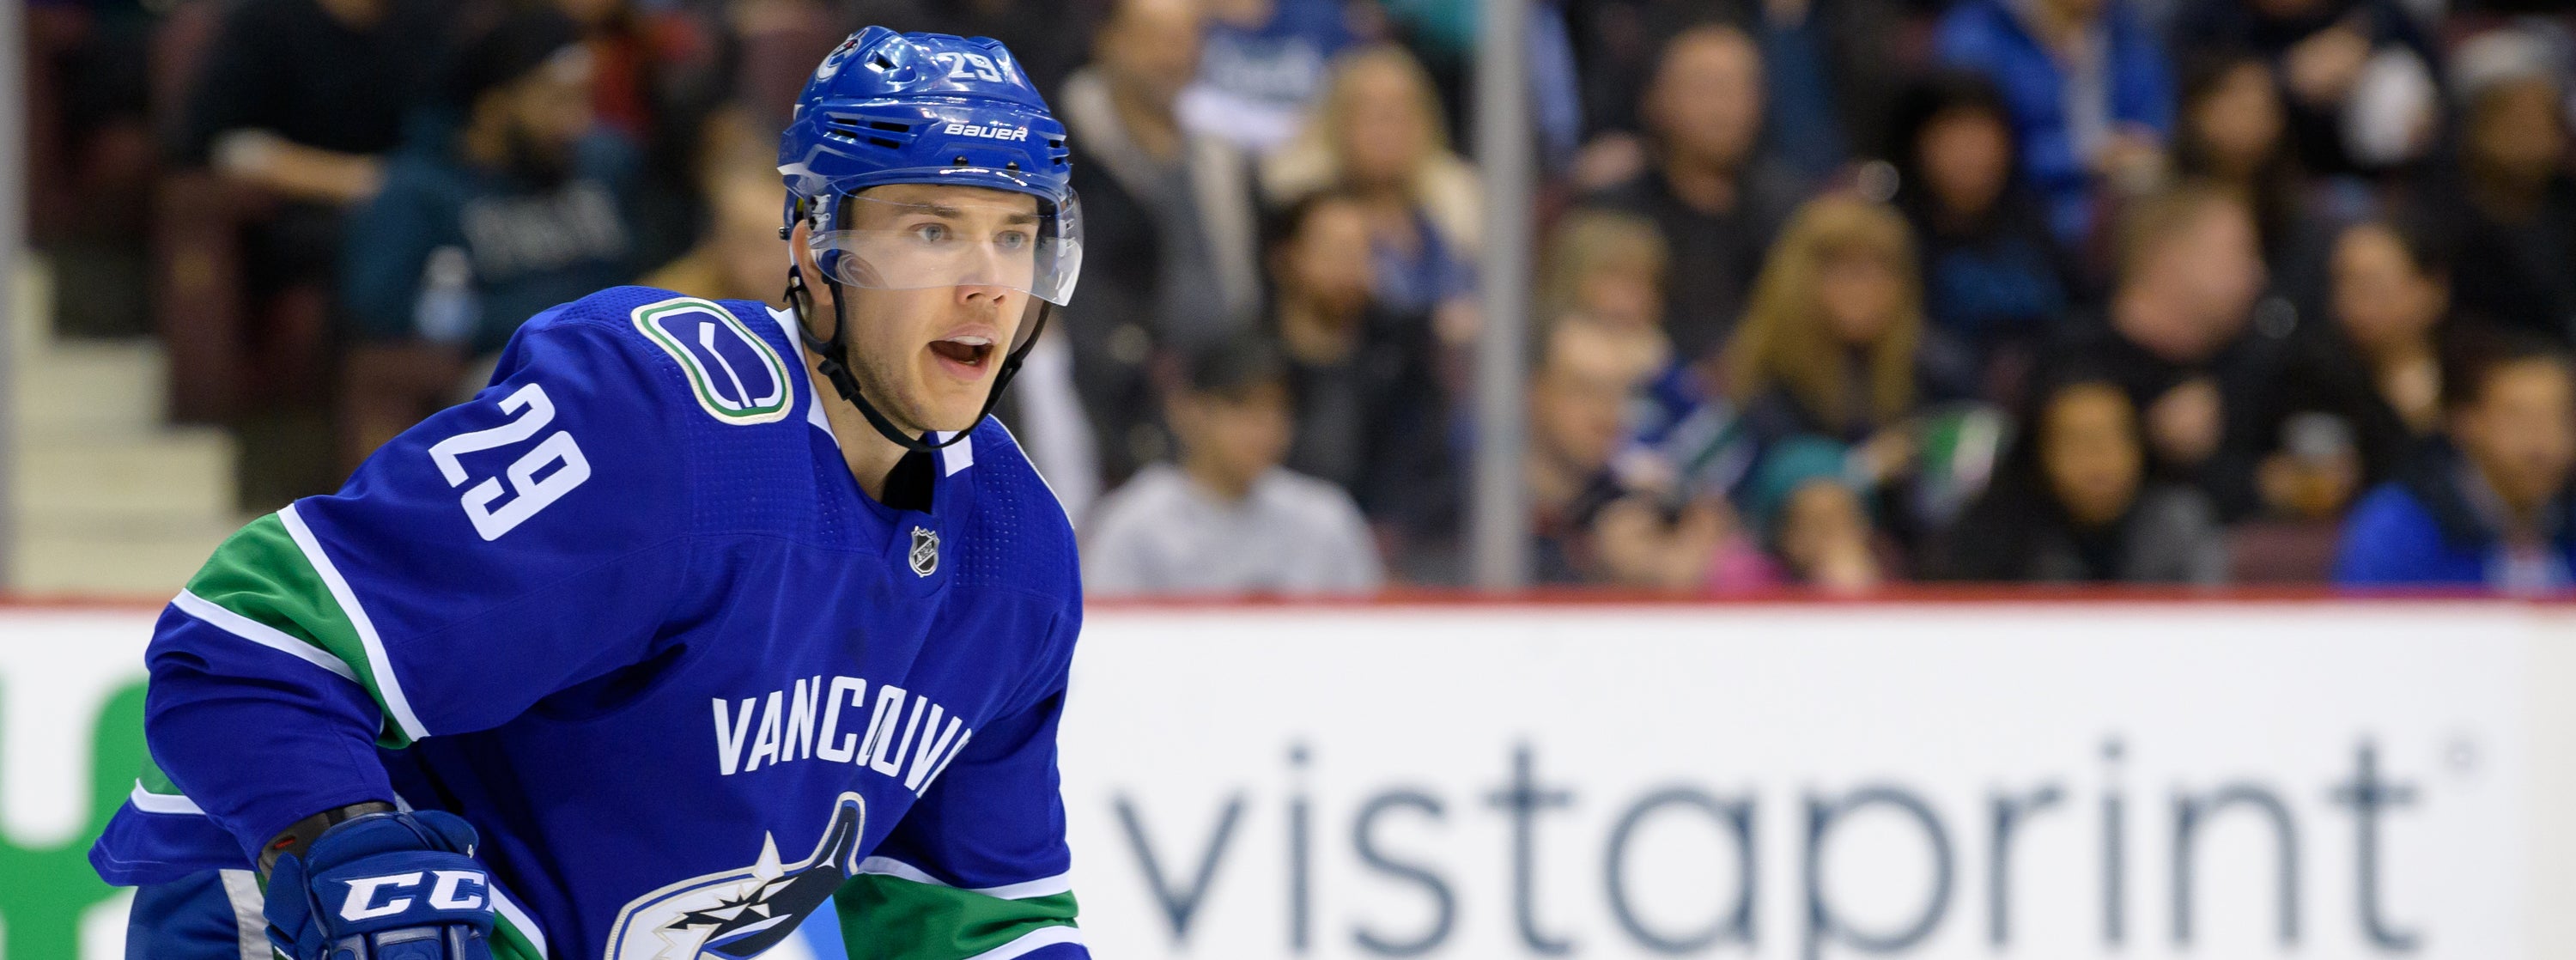 COMETS ANSWER THE CALL IN VANCOUVER